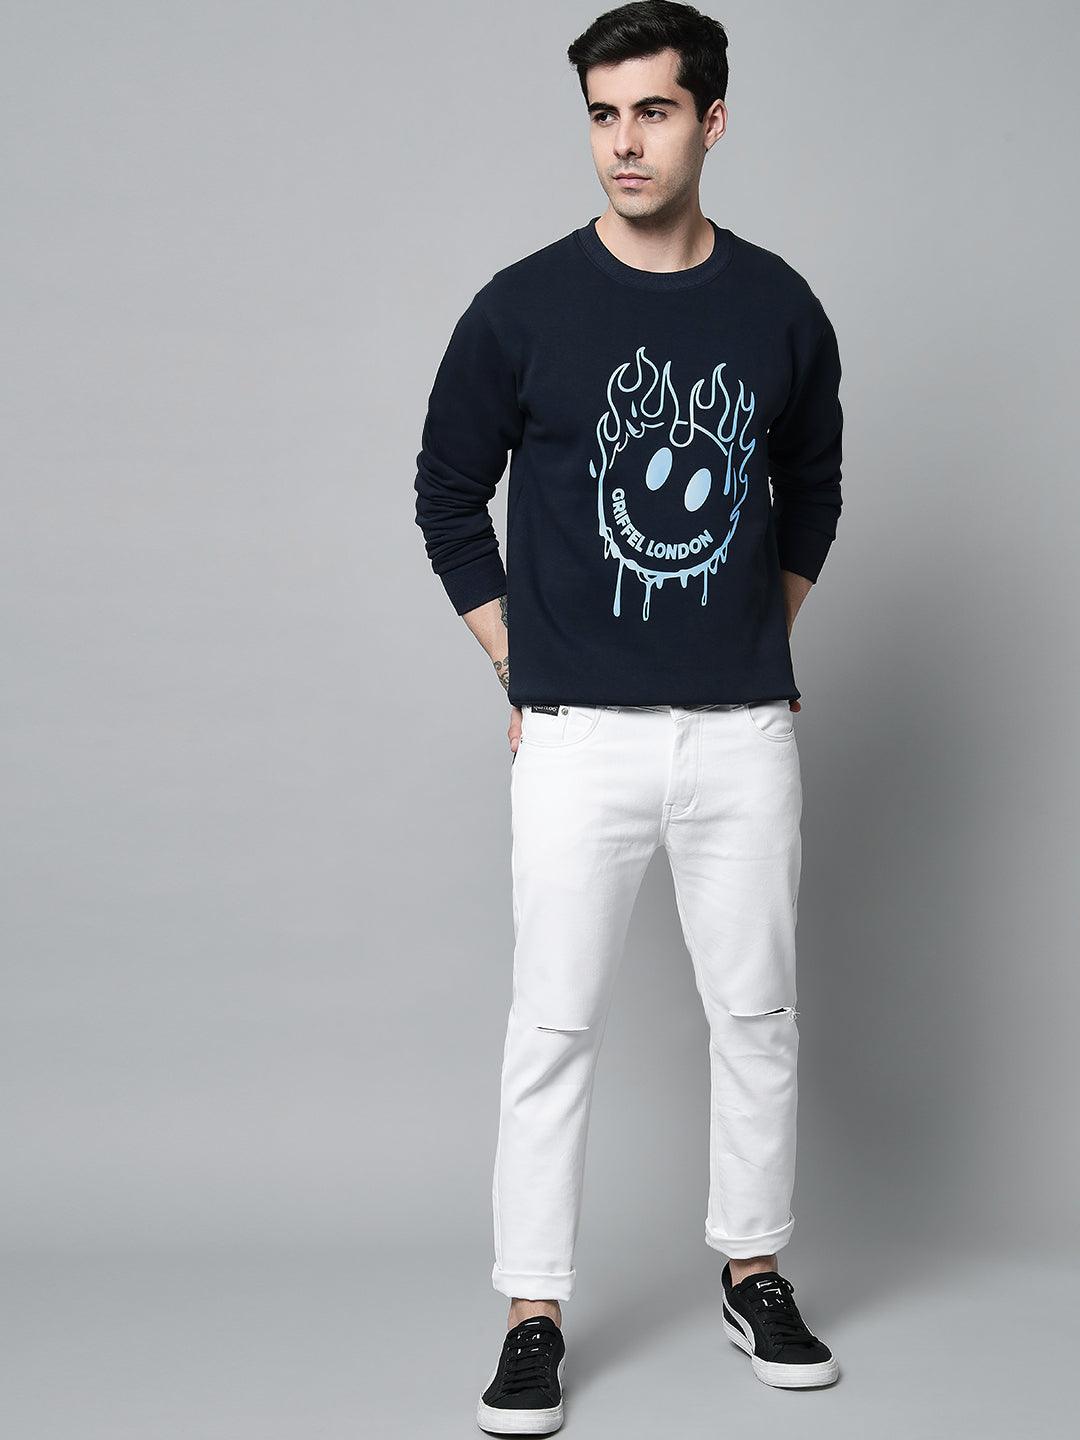 Griffel Men's Cotton Fleece Printed Sweatshirt with Long Sleeve and Front Logo Print - griffel